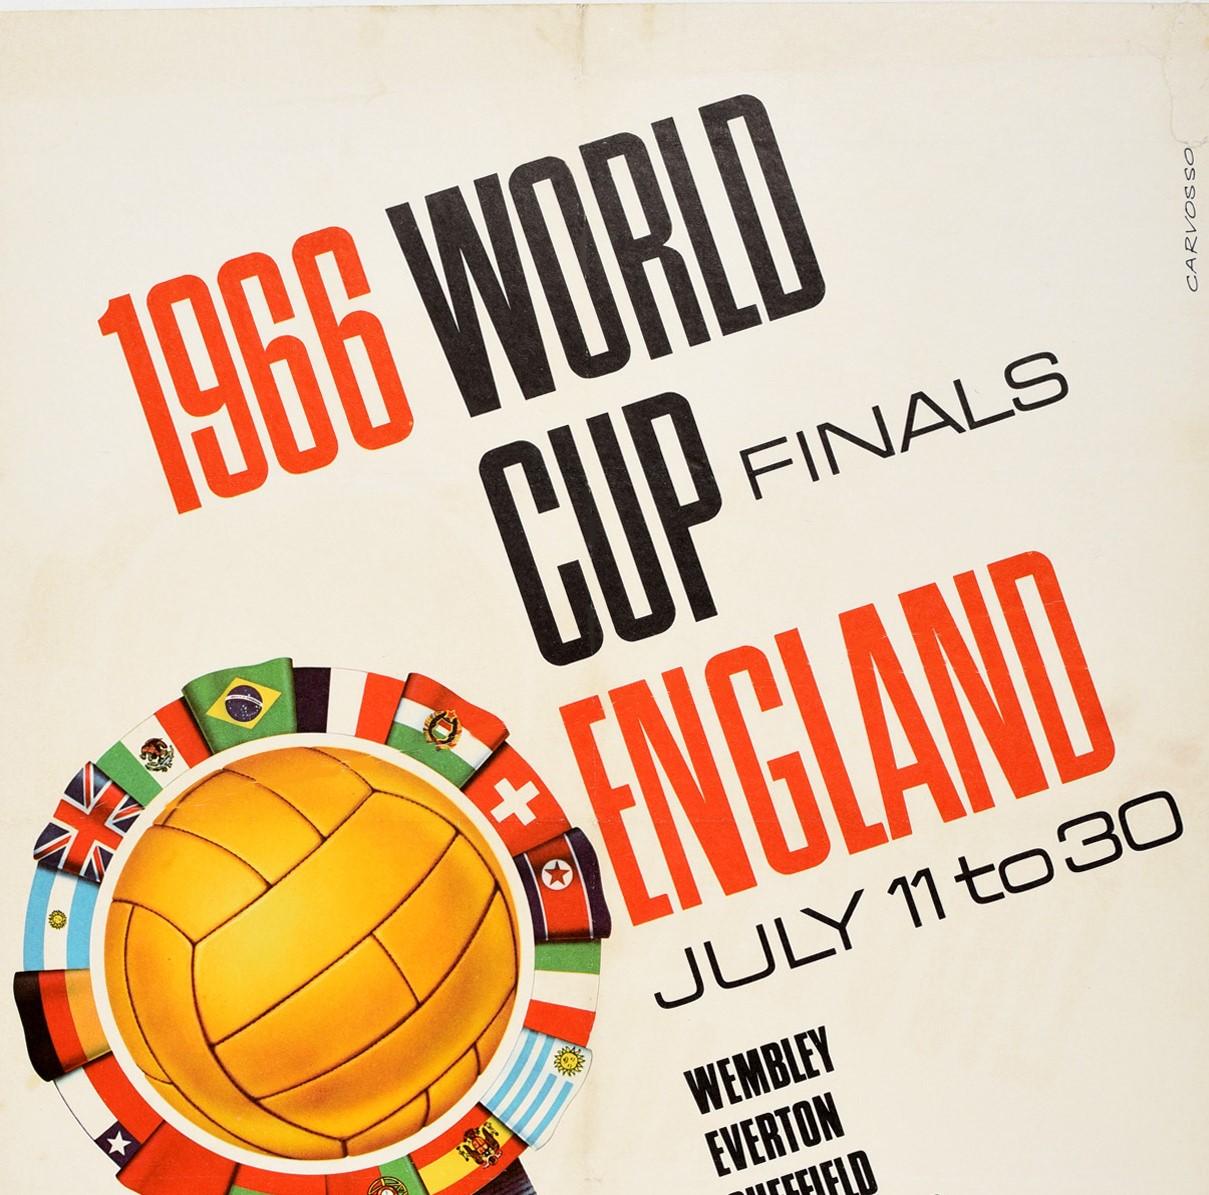 Original vintage sport advertising poster for the 1966 World Cup Finals England July 11-30 Wembley Everton Sheffield Sunderland Aston Villa Manchester Middleborough White City featuring a great illustration of a gold football surrounded by flags of